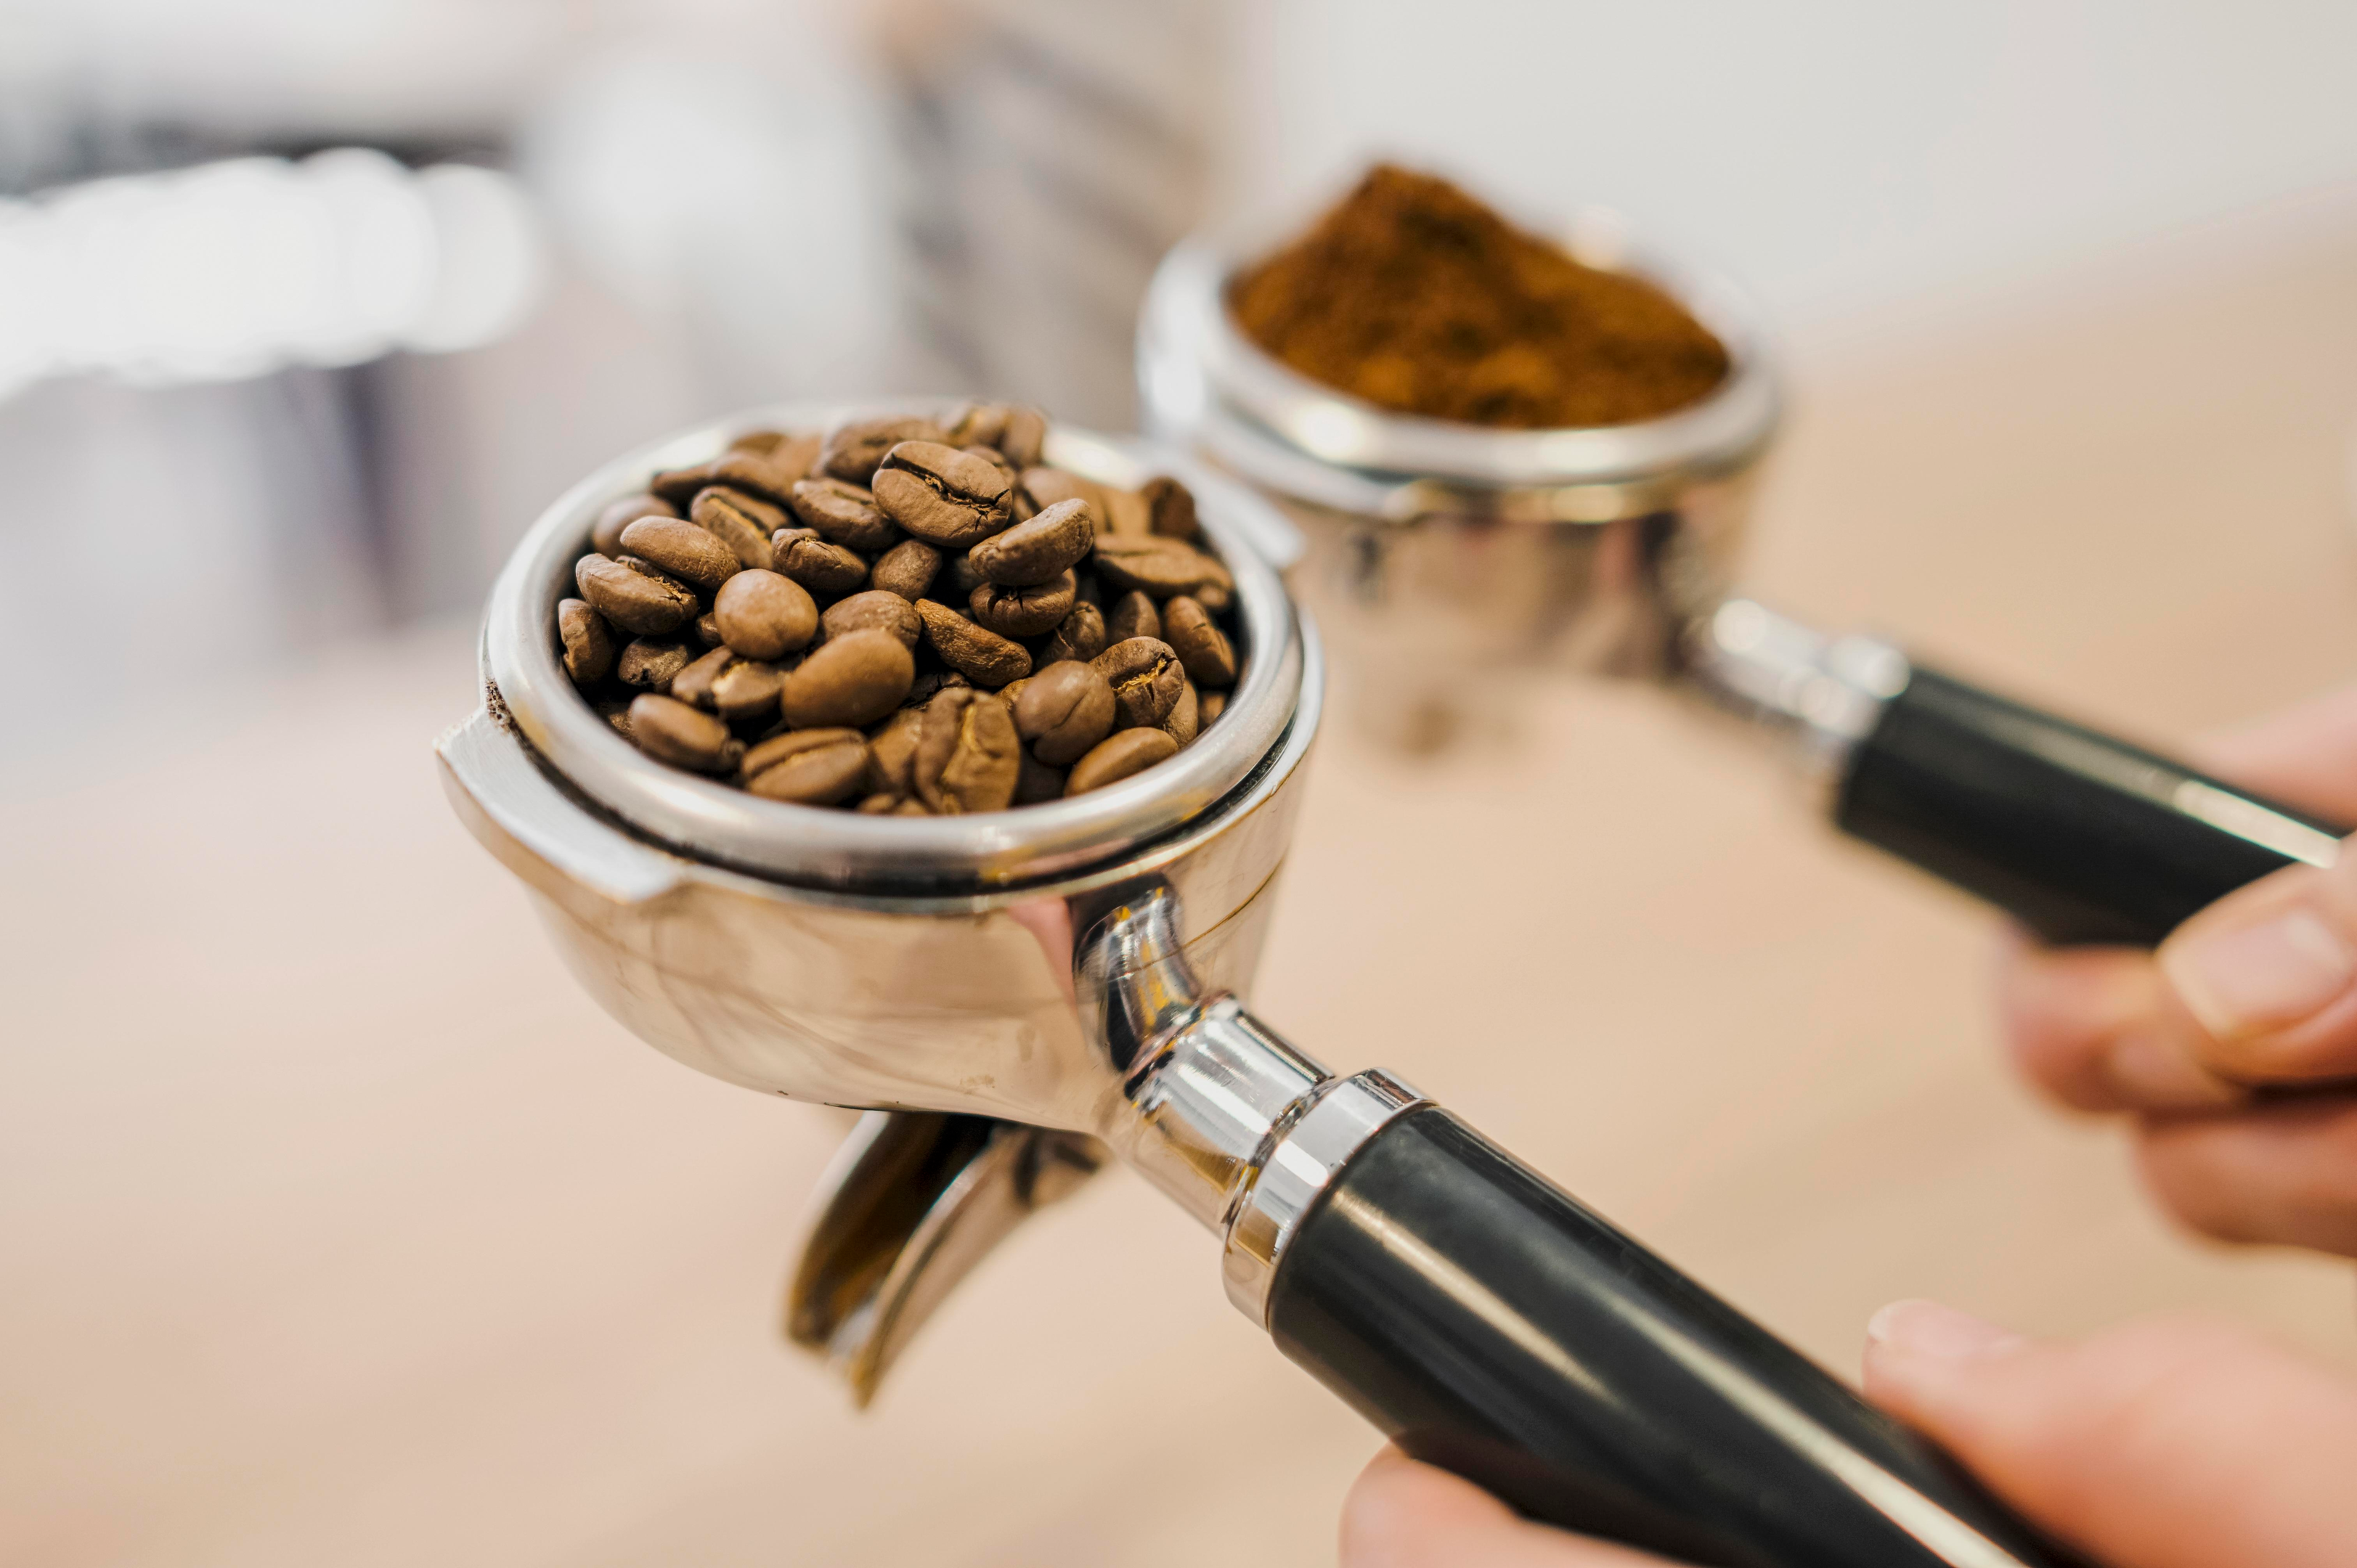 Roasted coffee beans in a portafilter